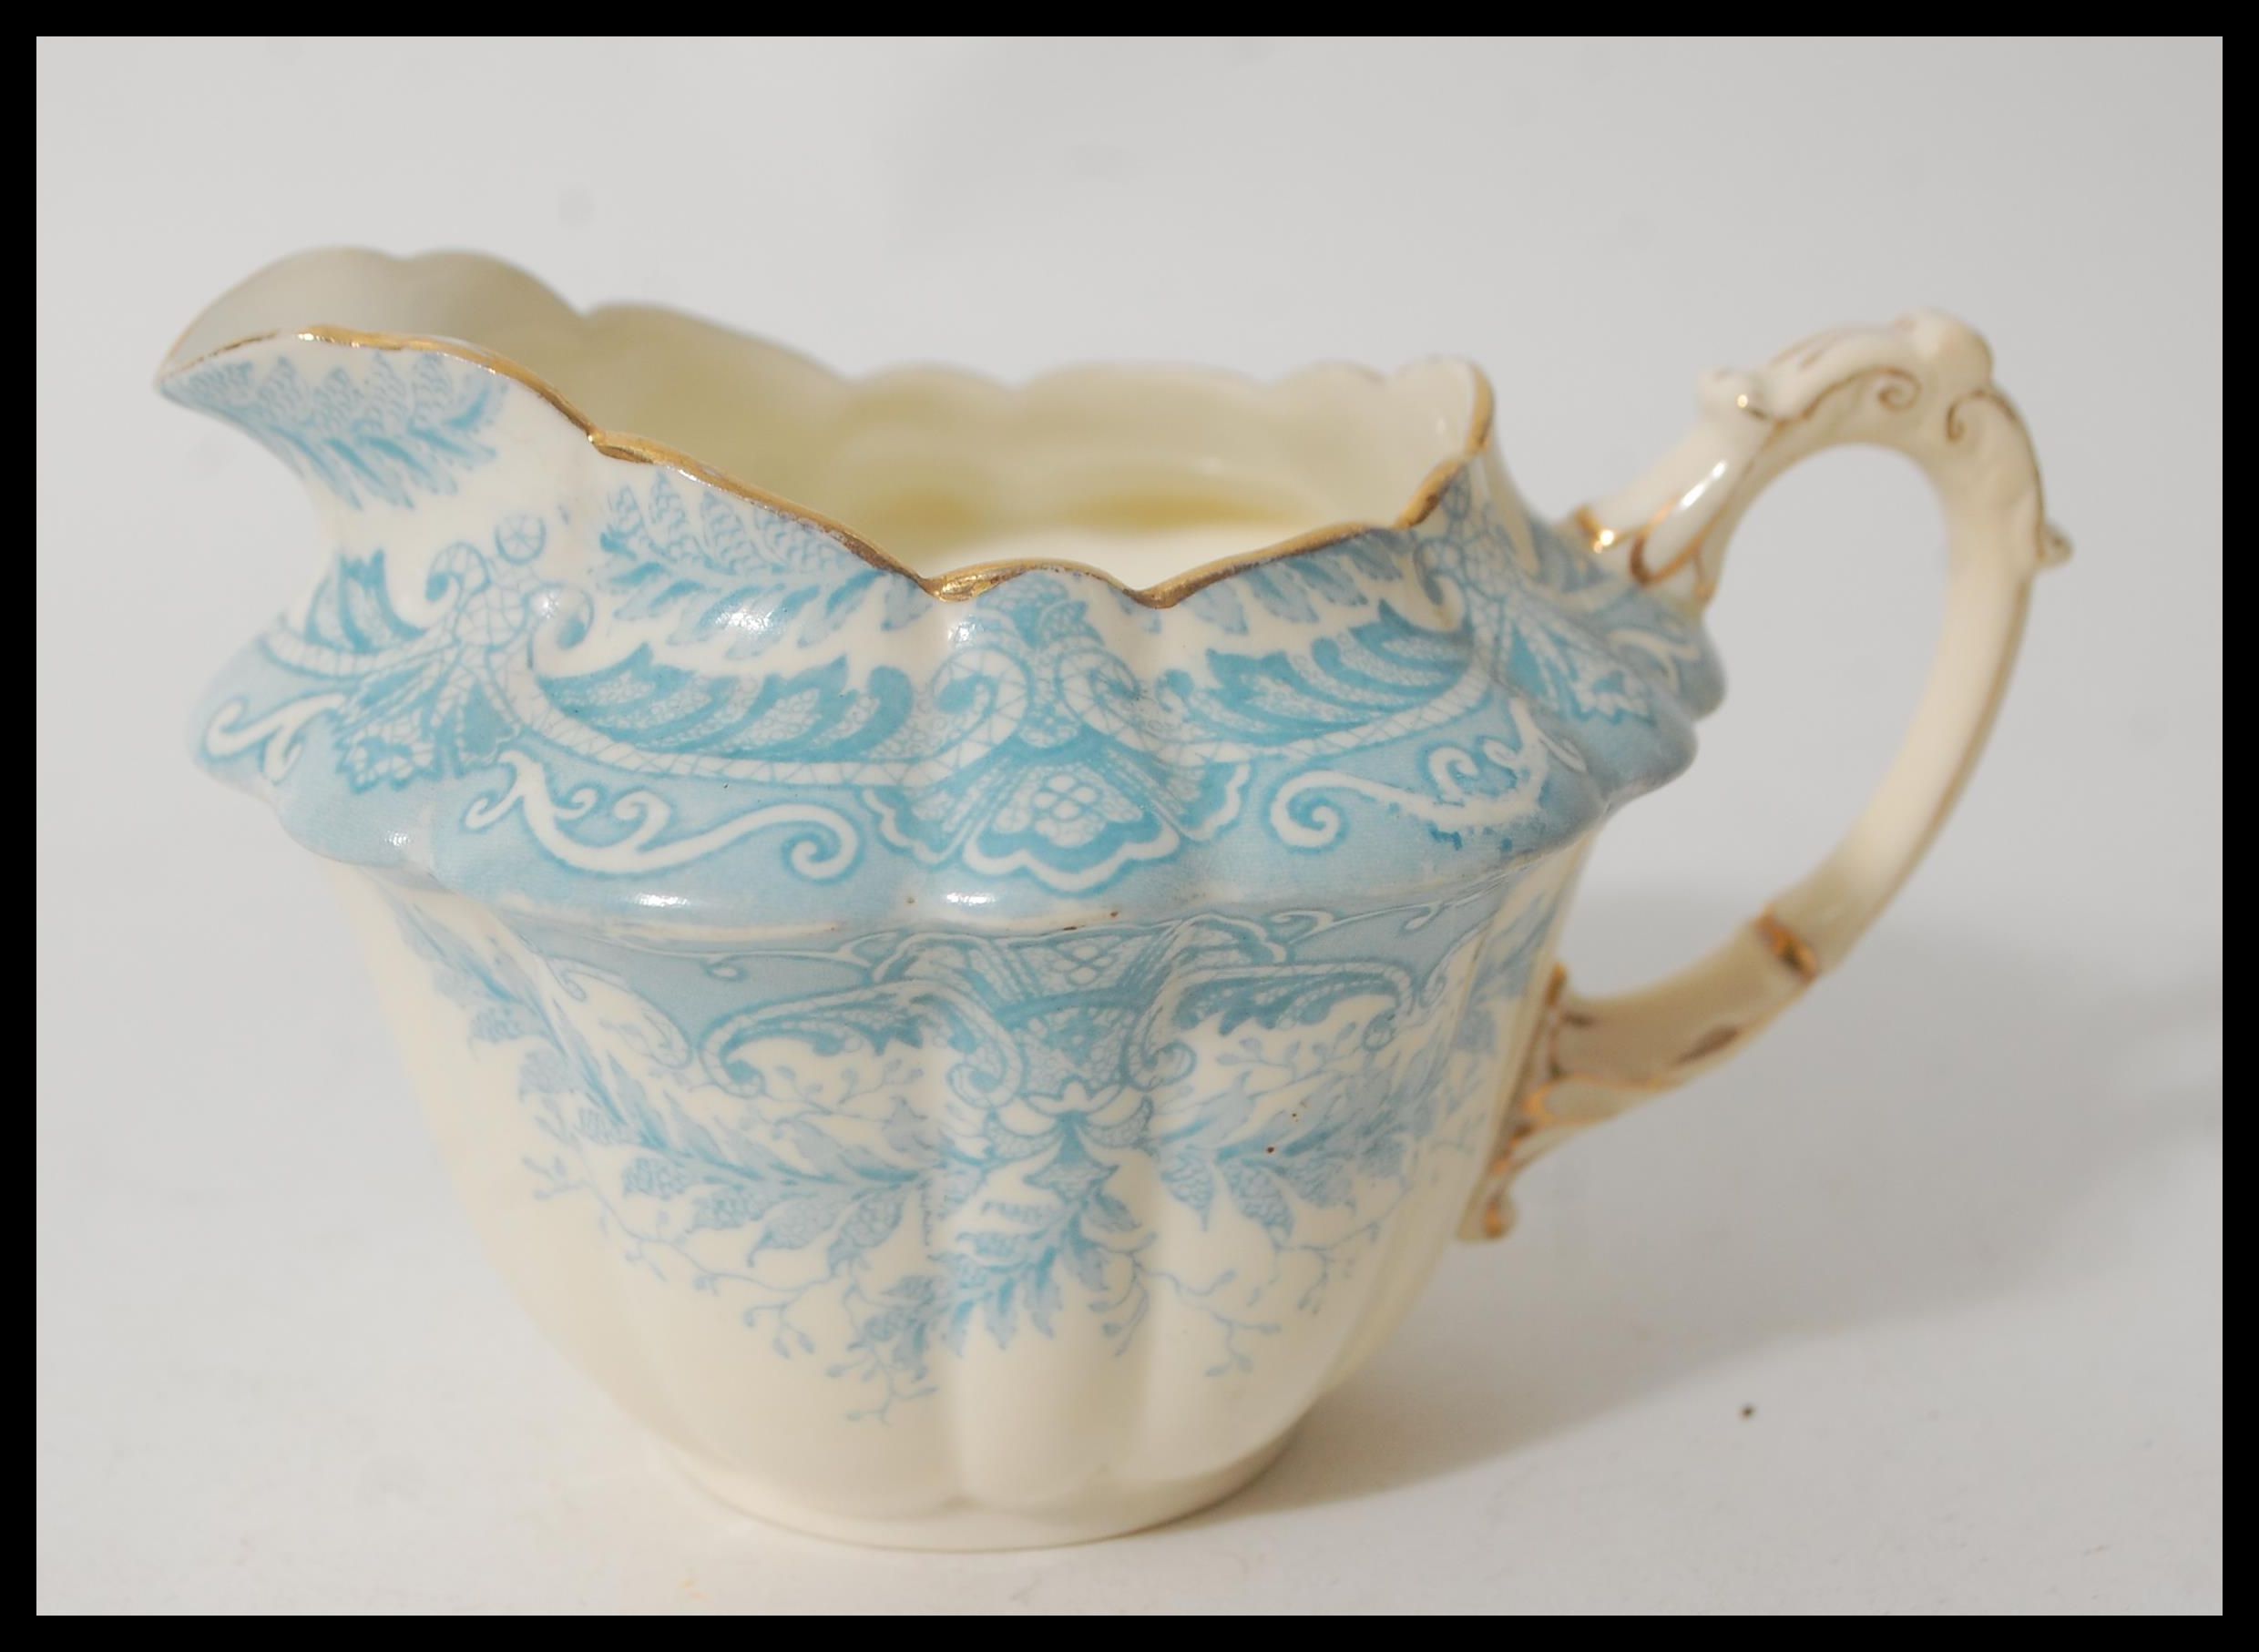 A 19th century Victorian Foley tea service transfer printed in the fern pattern in blue having - Image 6 of 11